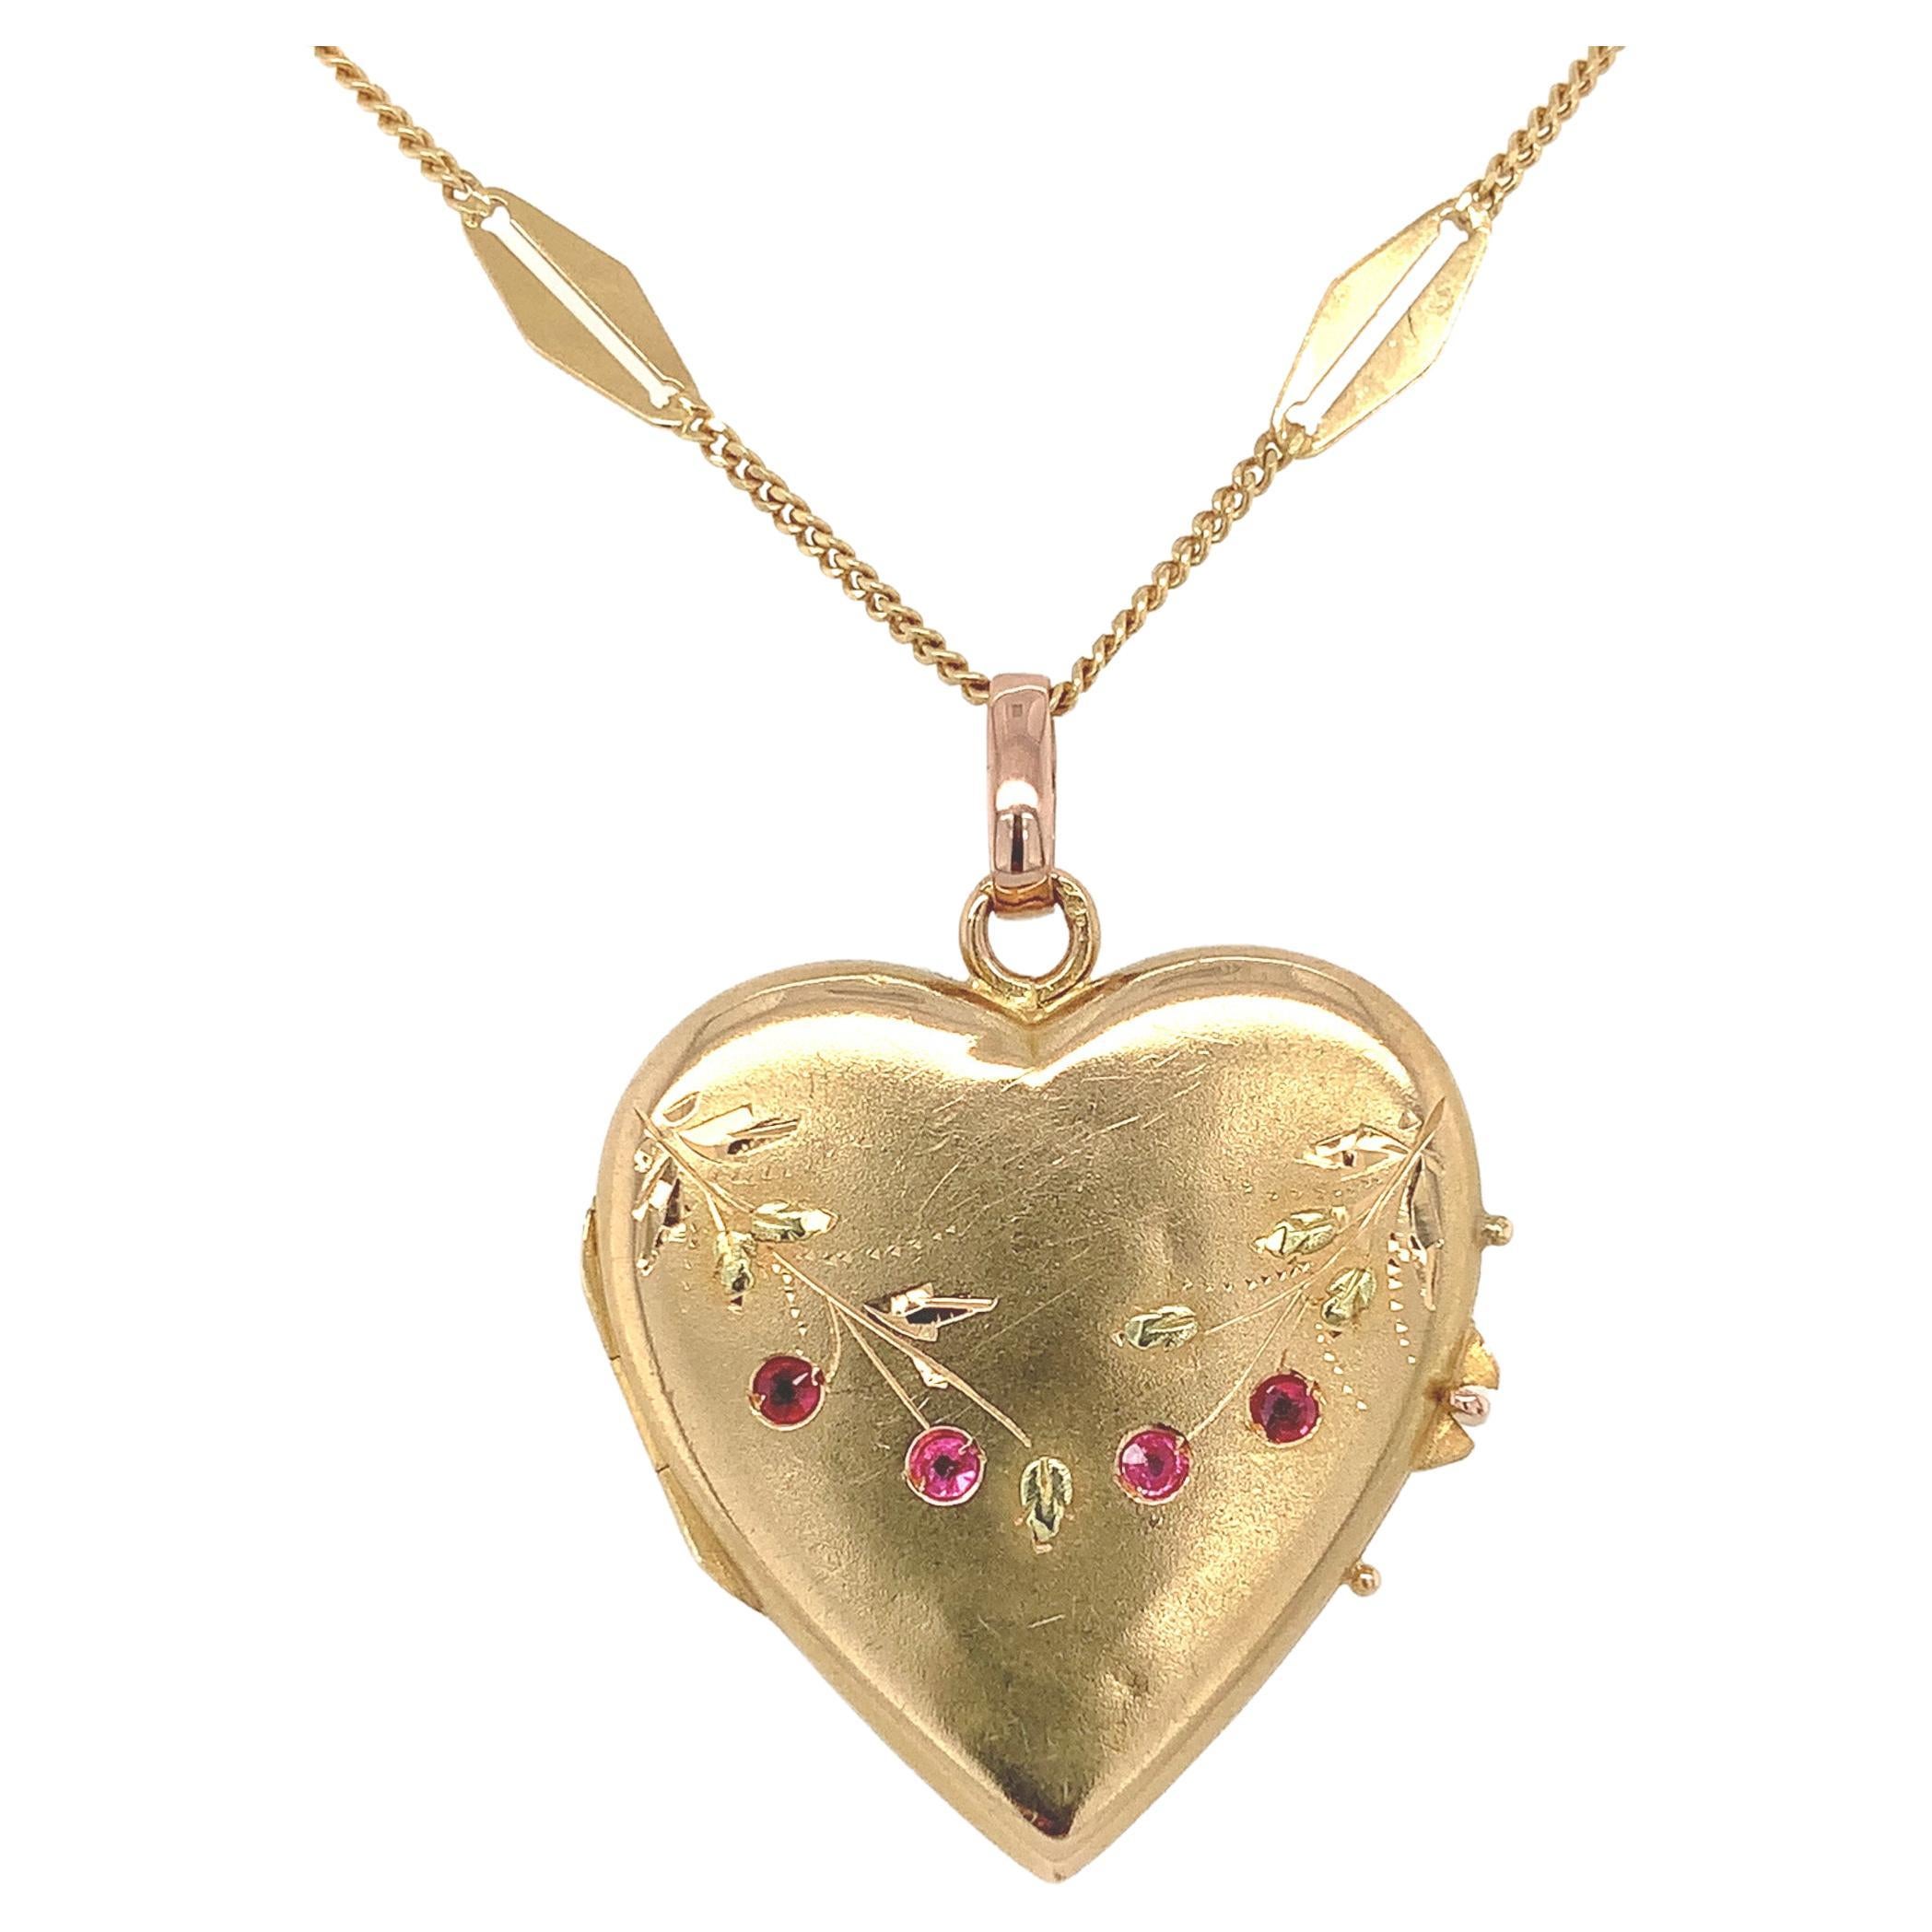 French 18K Rose Gold Heart Shape Locket on 18K Decorative Chain For Sale